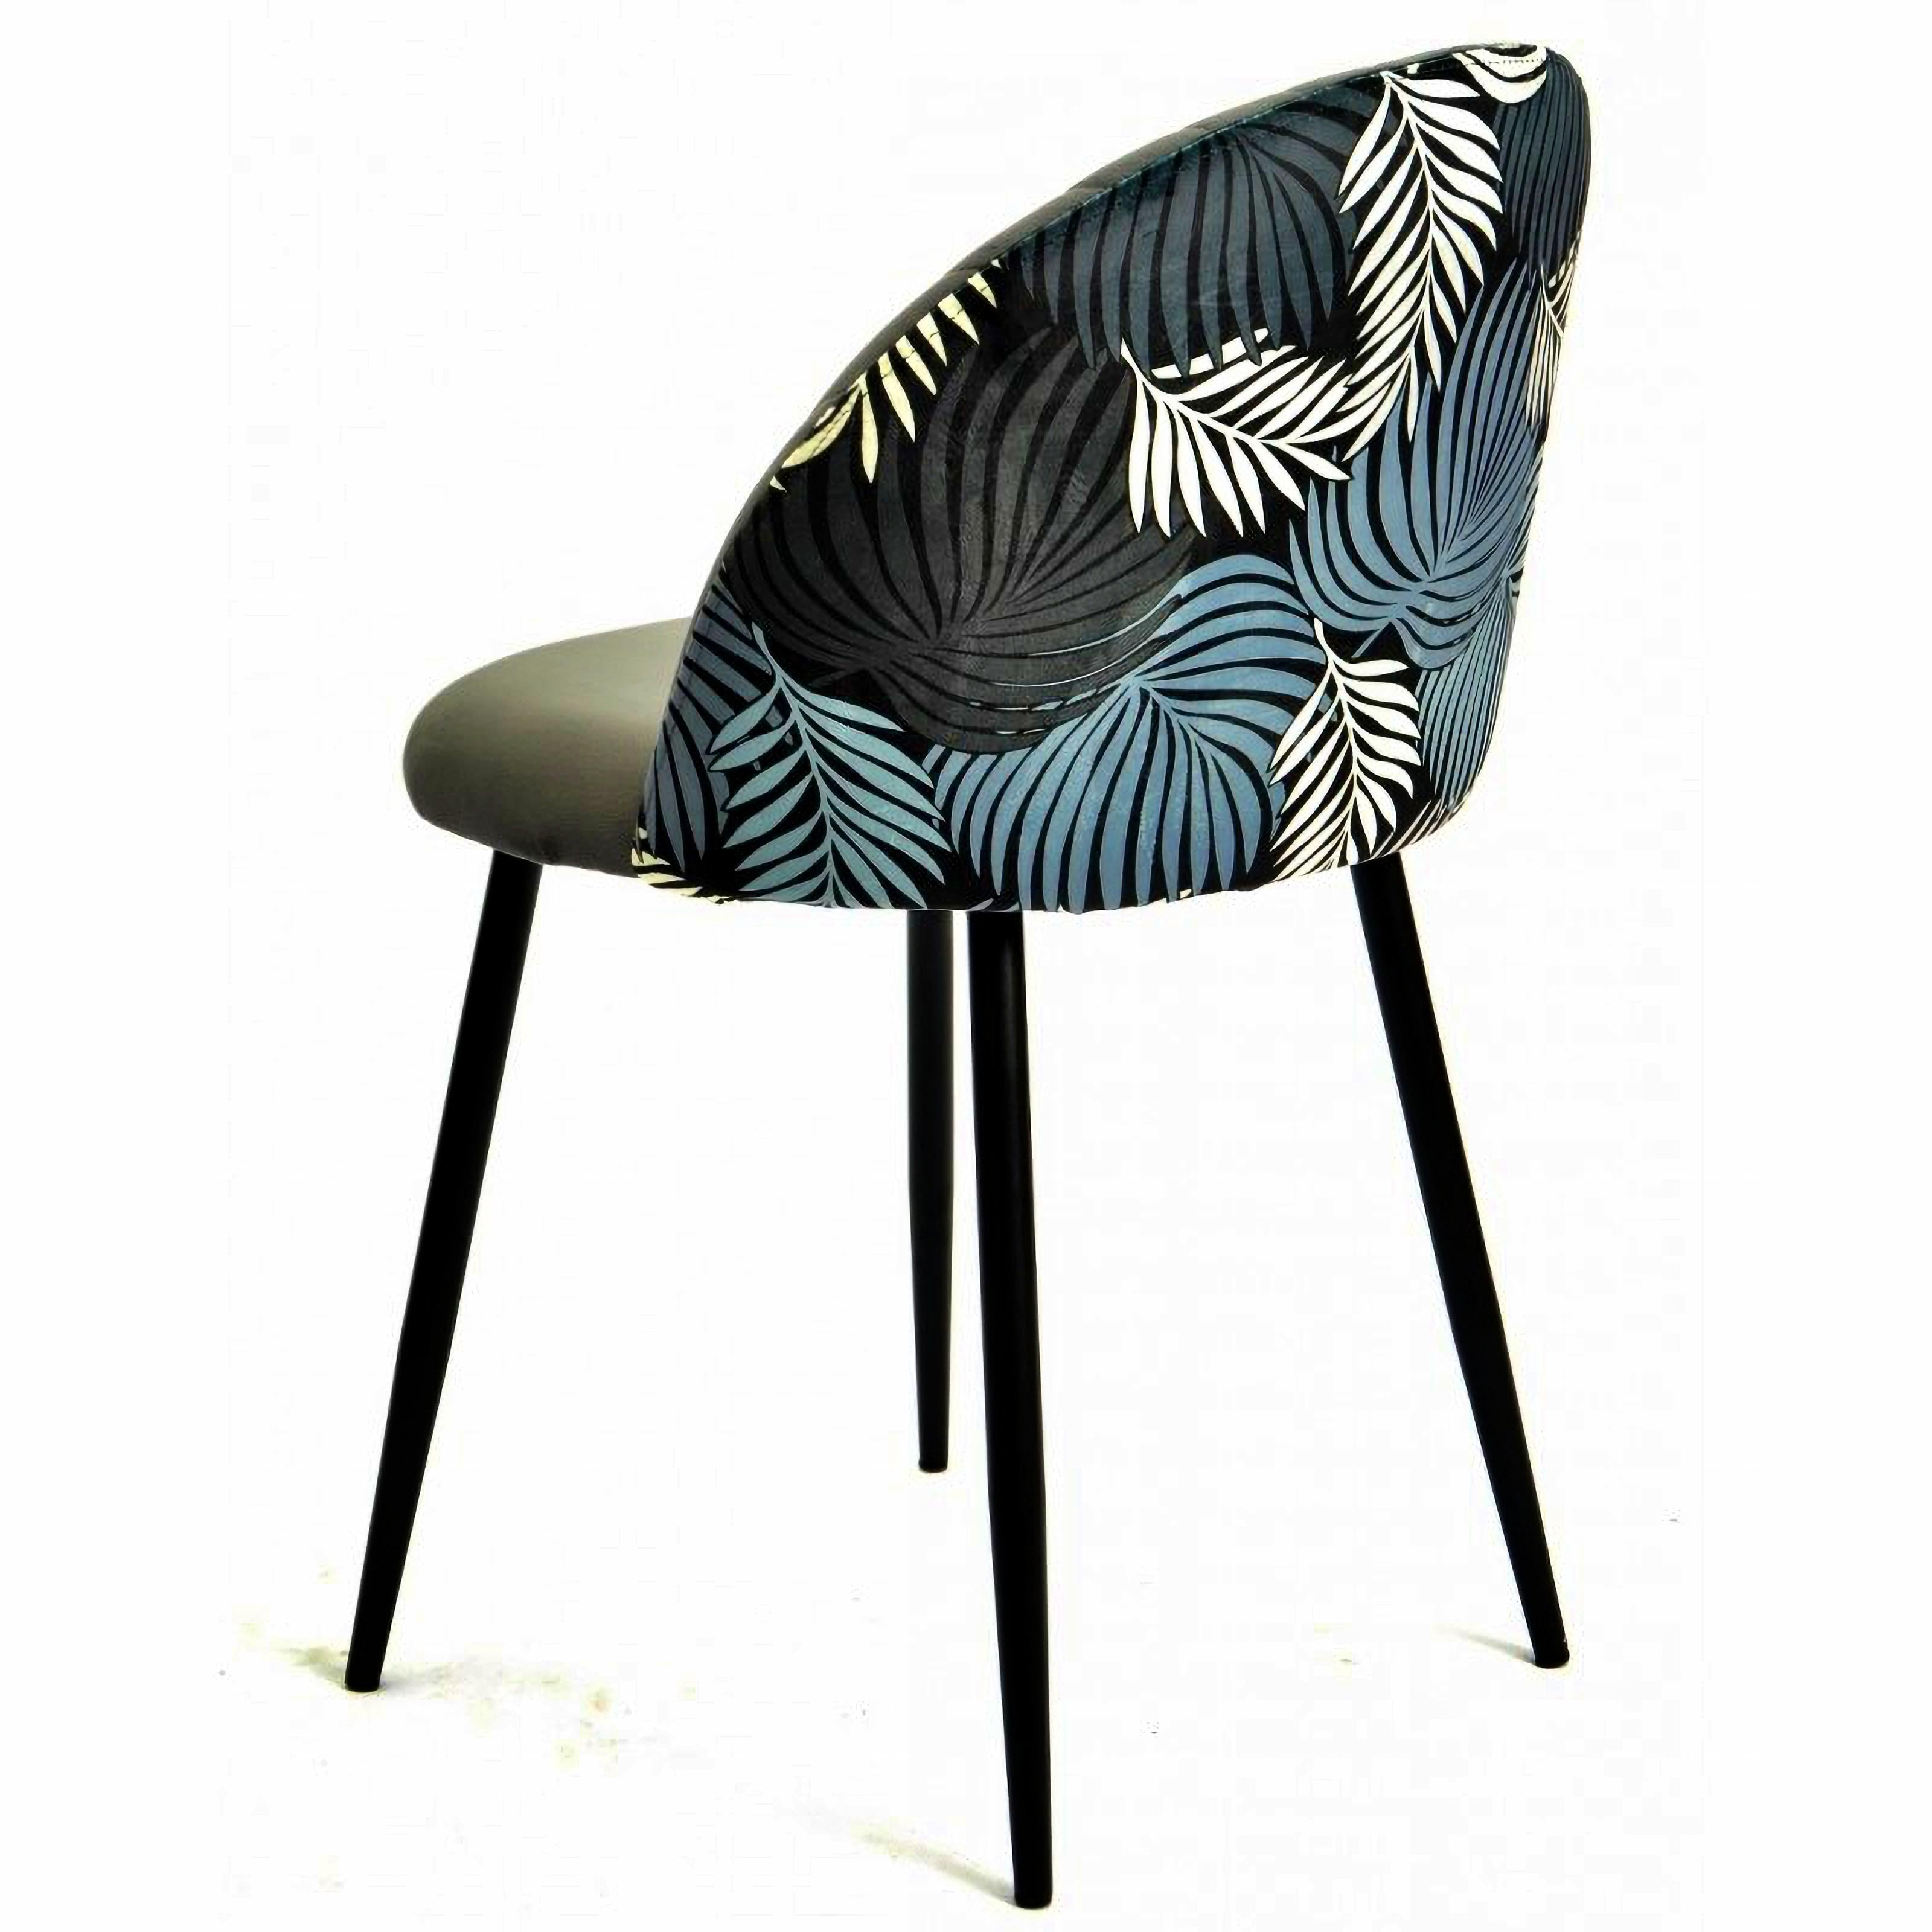 New 4 gray velvet upholstered chairs with floral back

Data sheet:

-Design chair, multipurpose.

-Metal frame finished in black epoxy paint

-Seat and back upholstered in gray velvet, backrest in matching floral decorated fabric

Dimensions: Width: